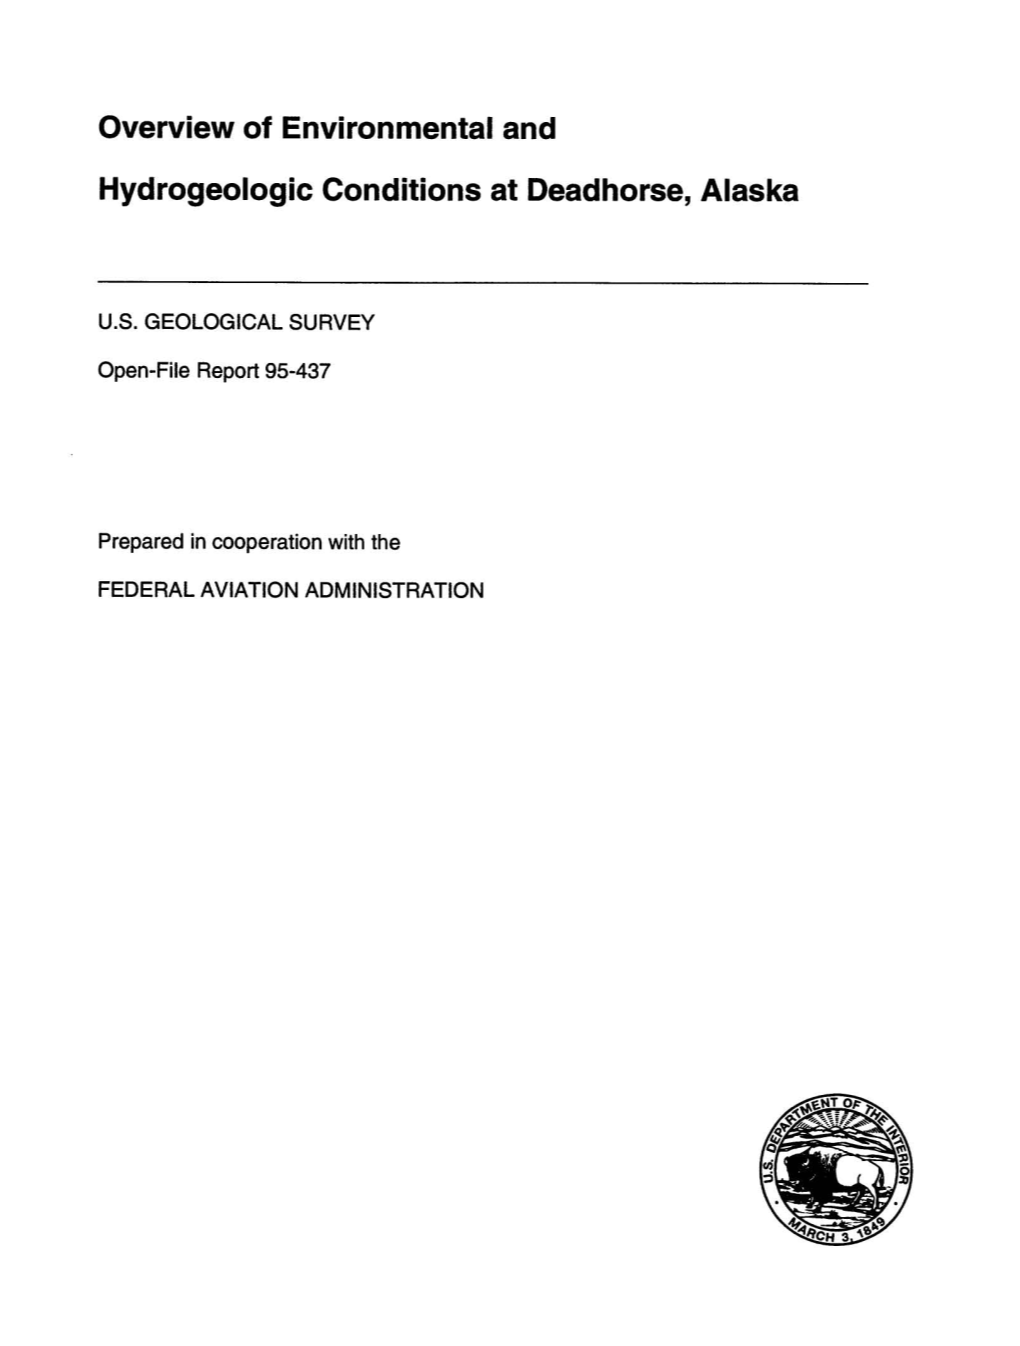 Overview of Environmental and Hydrogeologic Conditions at Deadhorse, Alaska